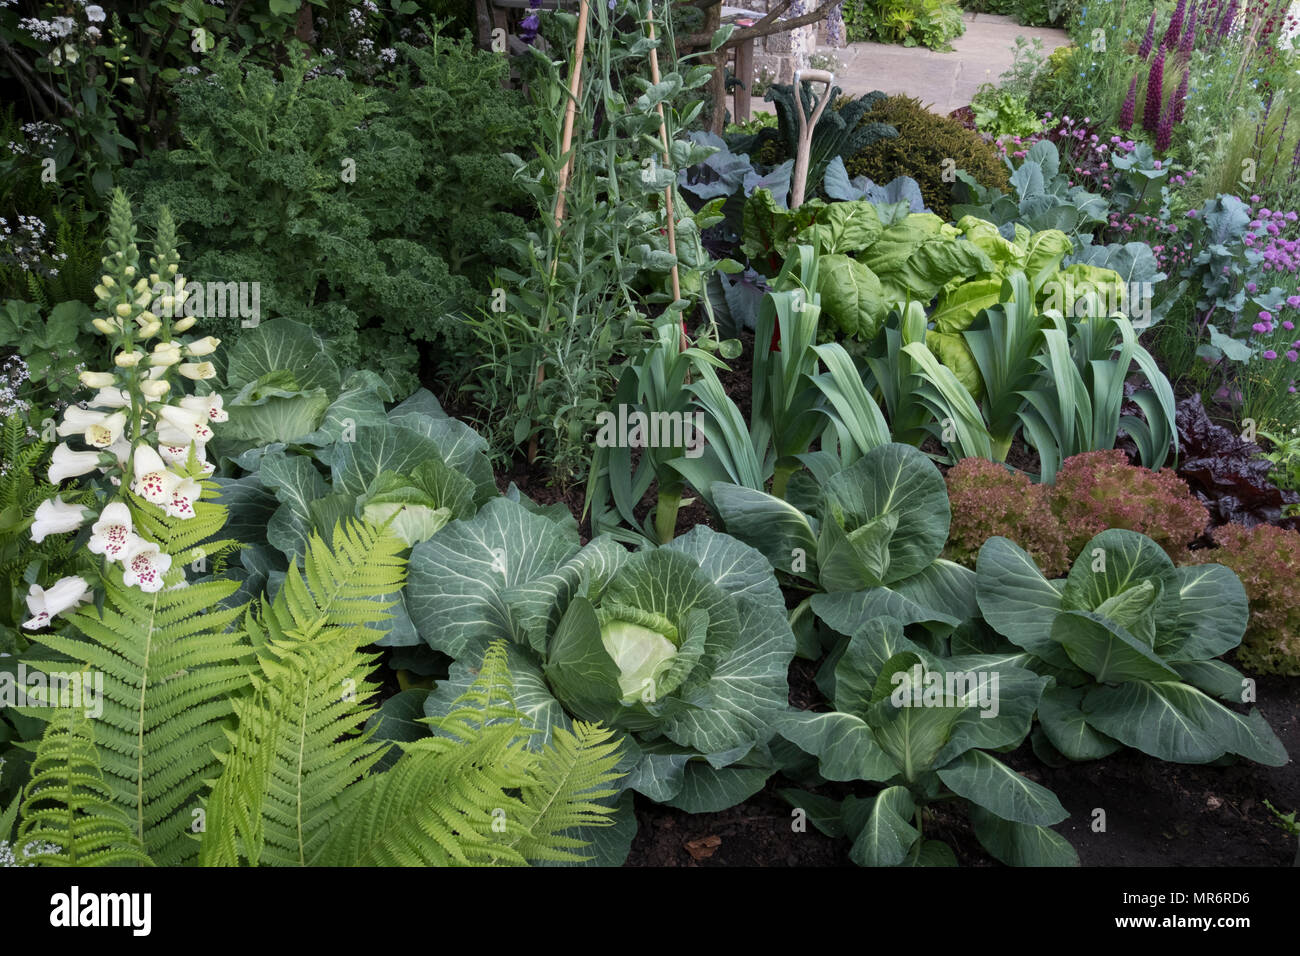 Garden vegetable patch with cabbages leeks greens growing Stock Photo